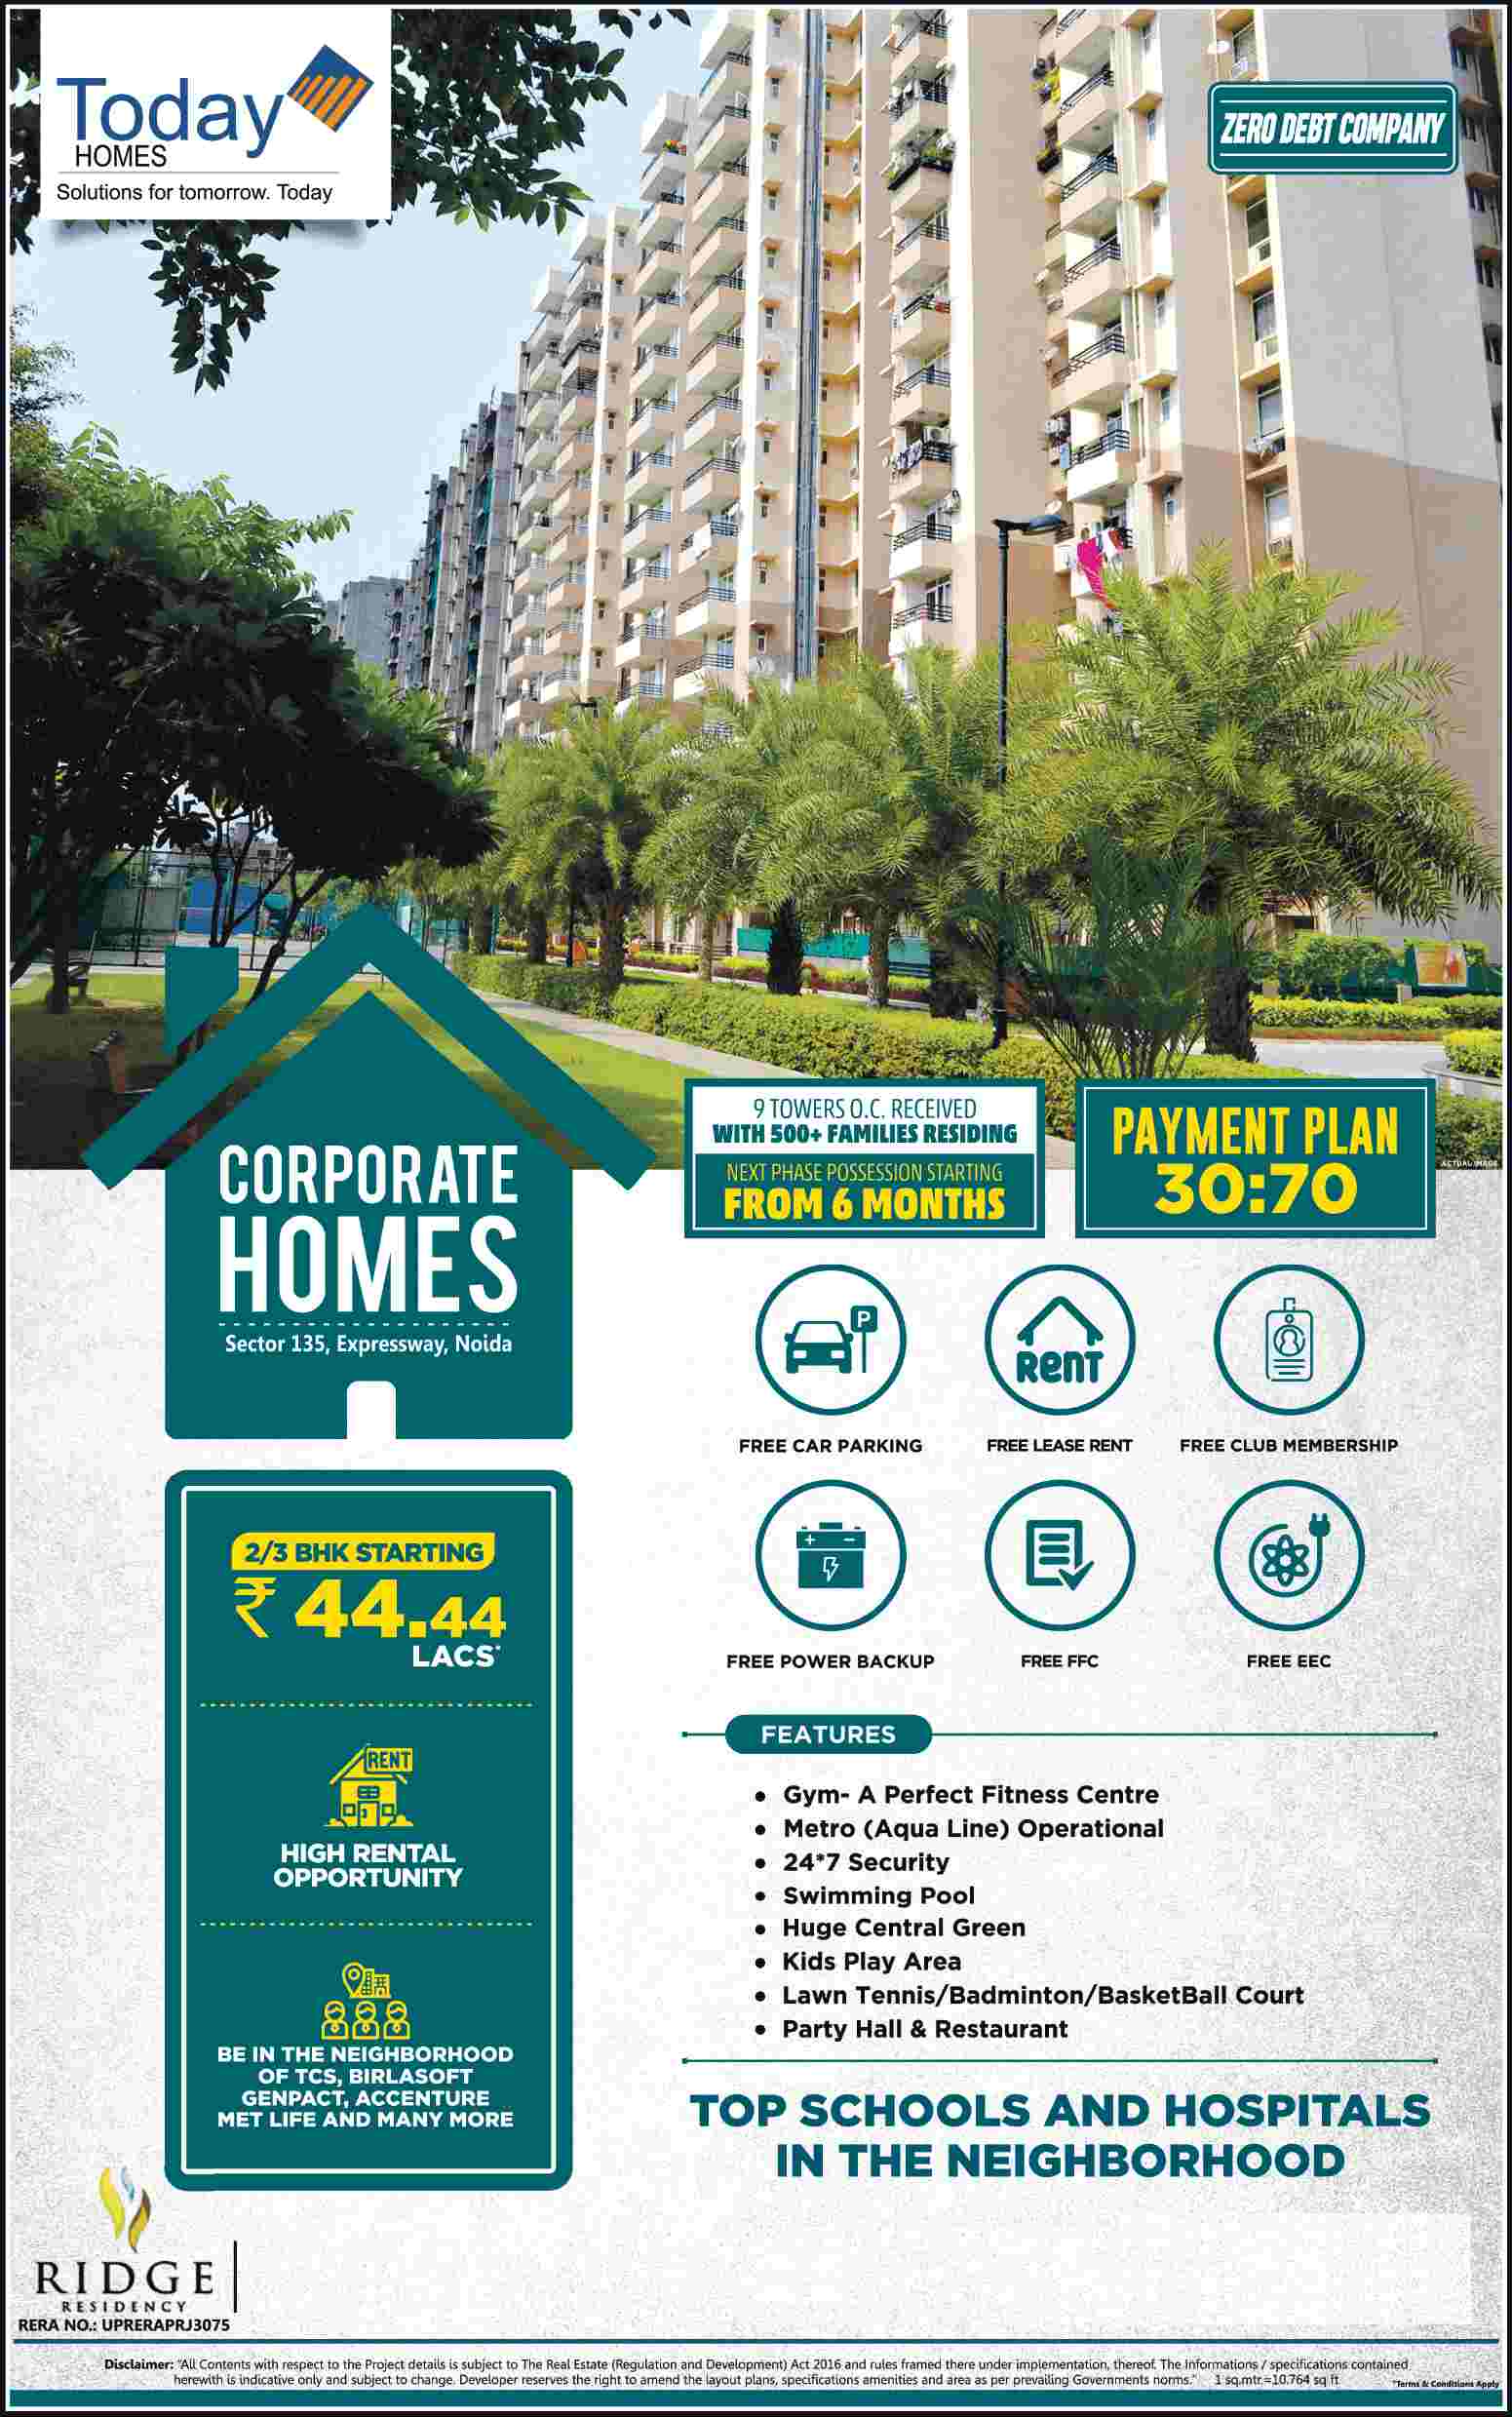 Book 2 & 3 BHK apartments @ Rs 44.44 Lacs at Today Ridge Residency in Sector 135, Noida Update